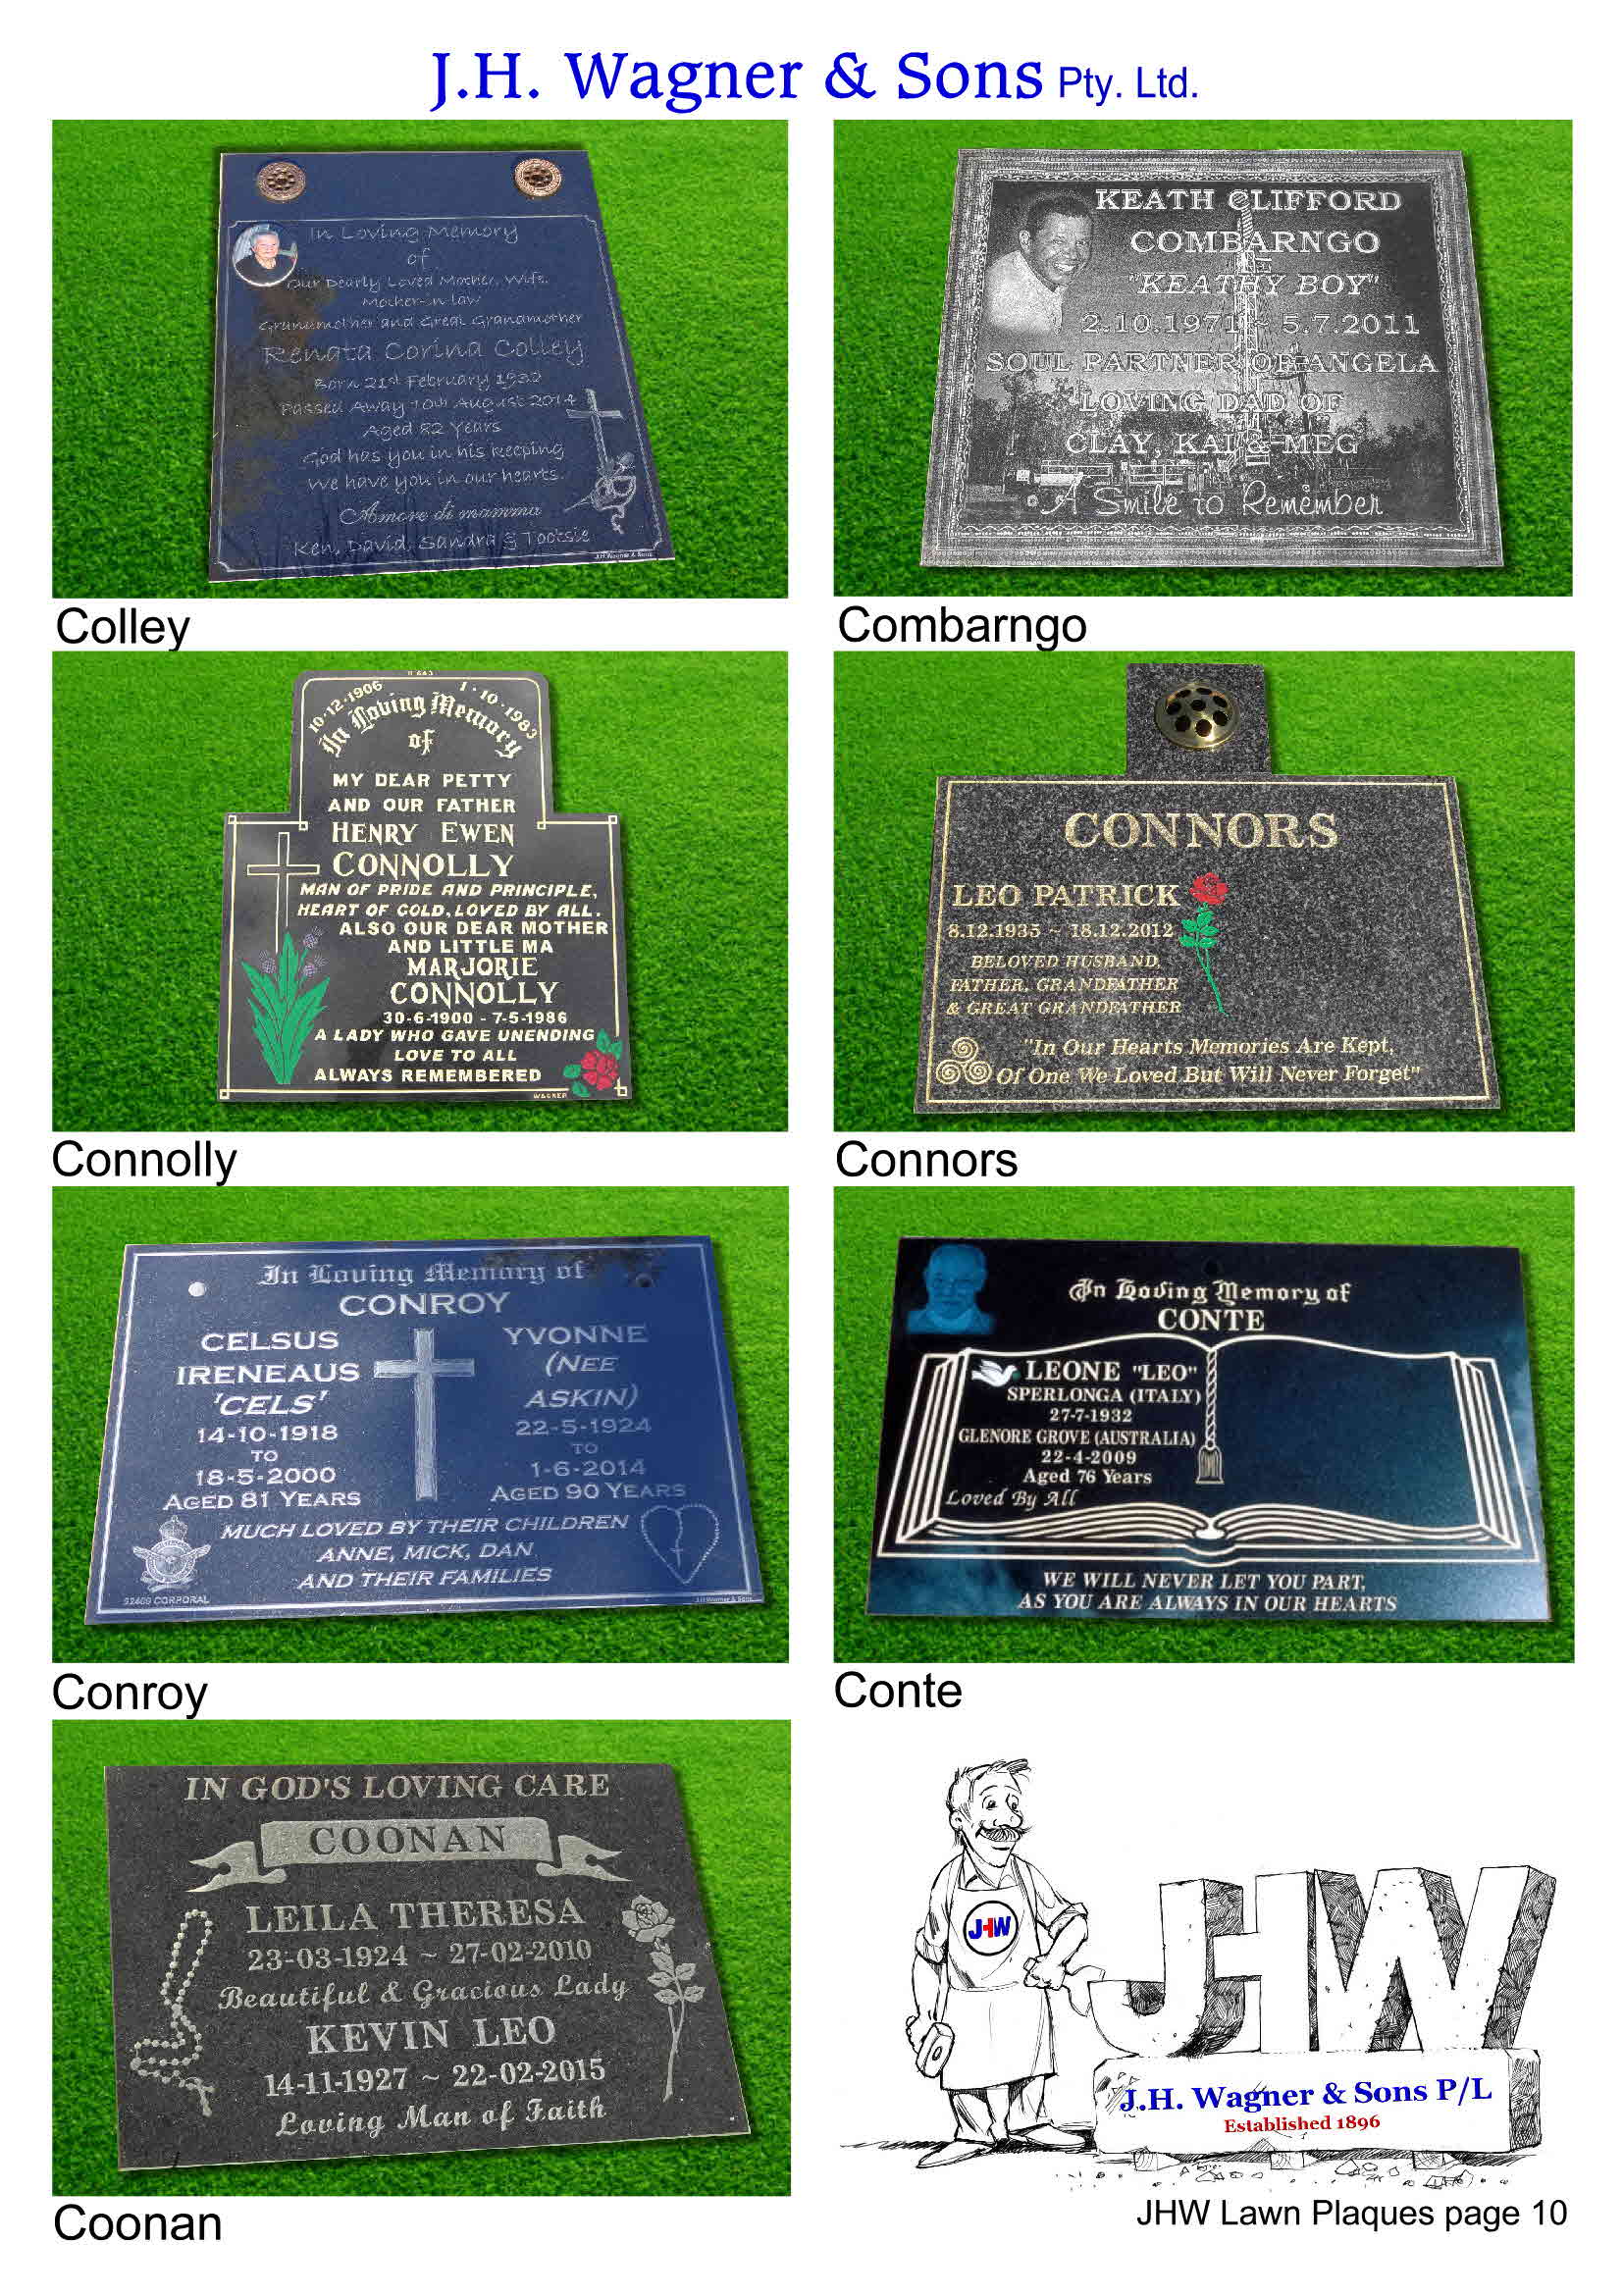 Memorial Plaques By J.H. Wagner & Sons